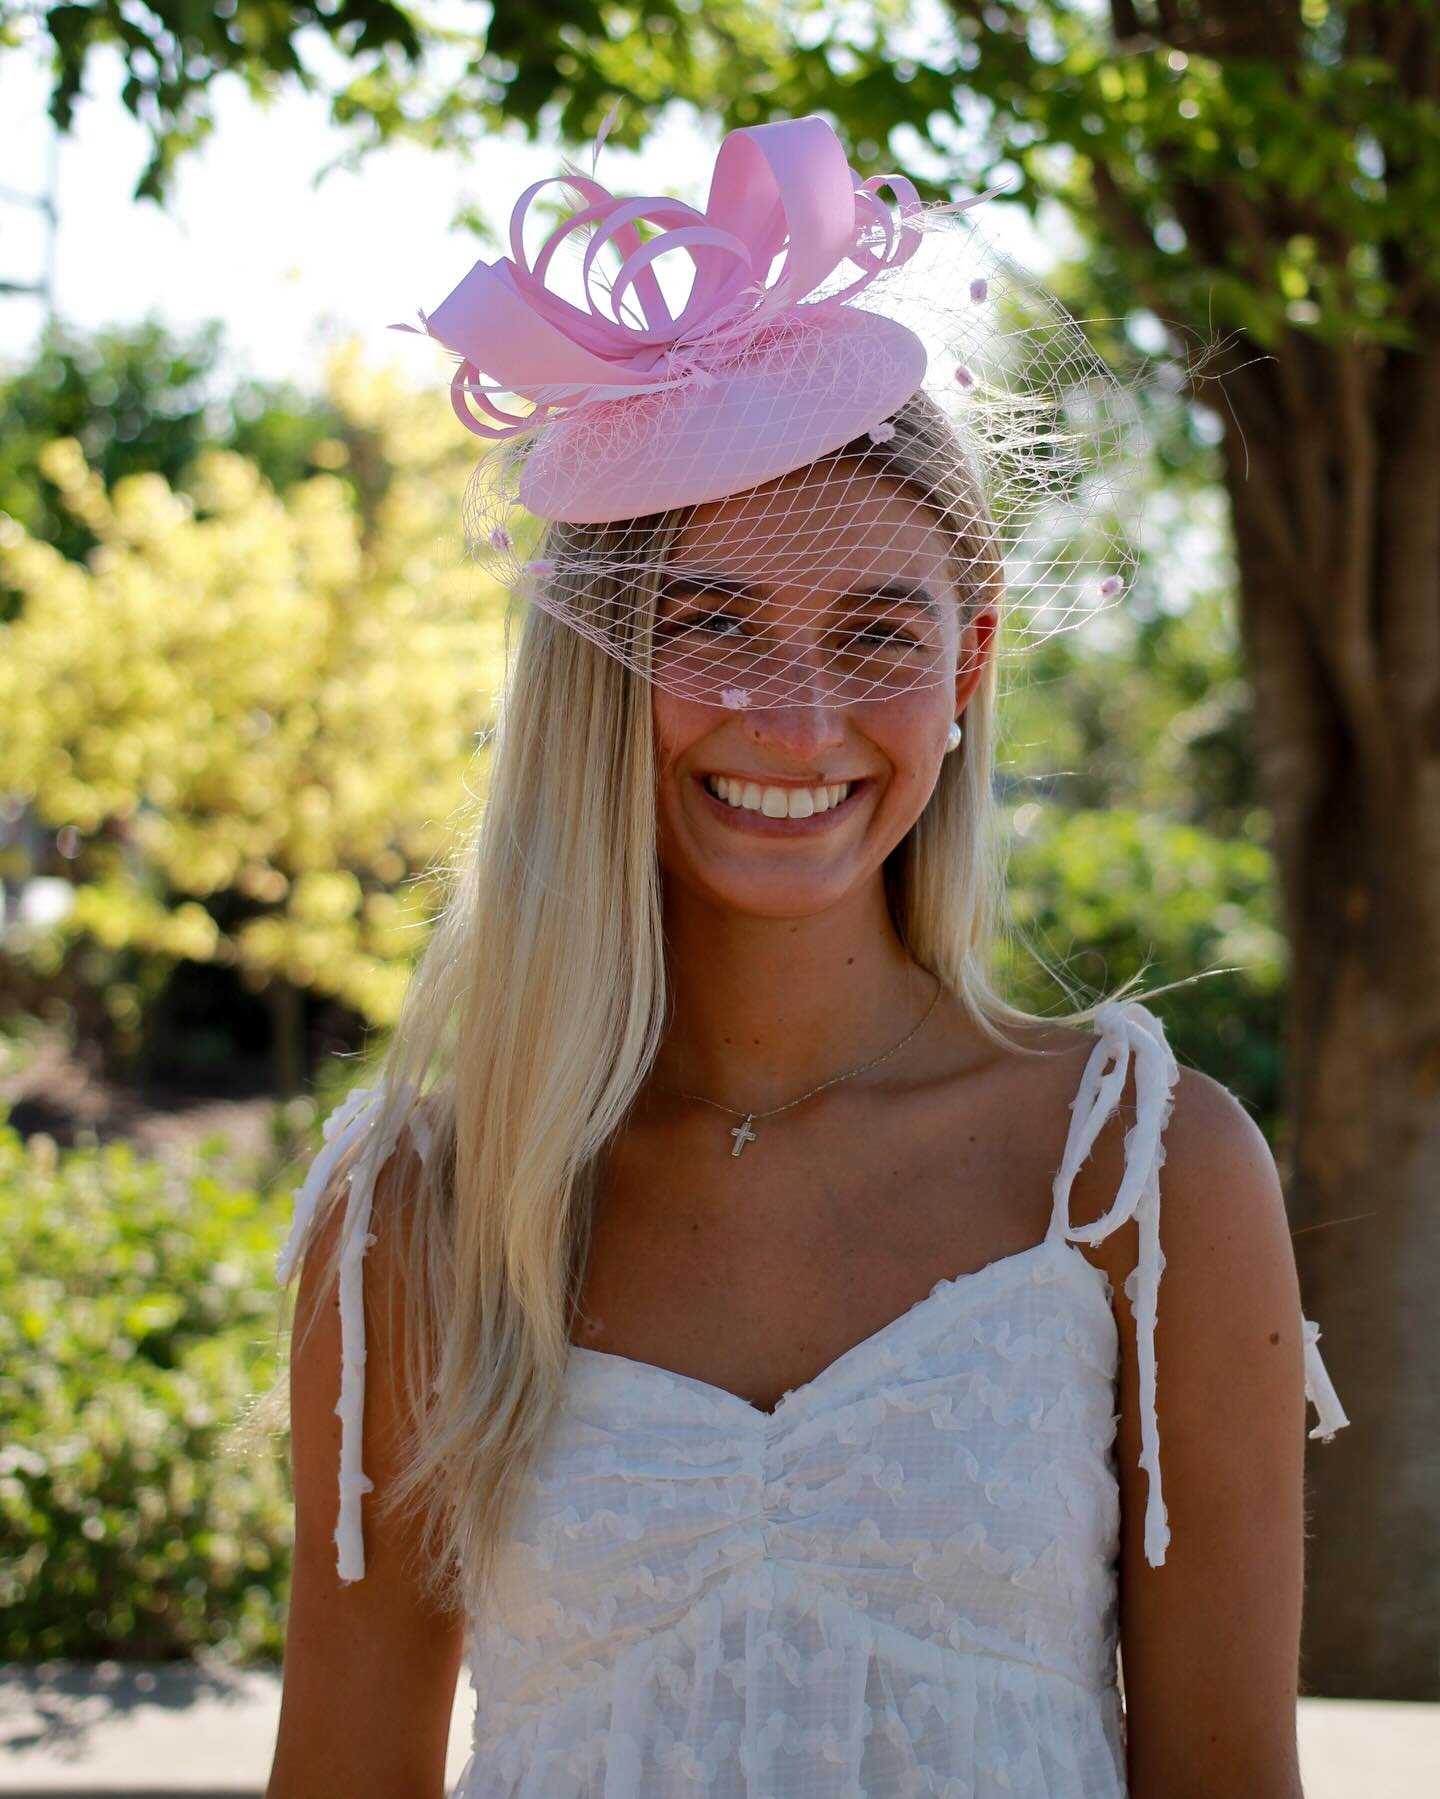 🐎 and&hellip;.they&rsquo;re off! The perfect Kentucky Derby fascinators just hit the store and the site. With 30 styles to choose from, it&rsquo;s a sure bet you&rsquo;ll find a winner.